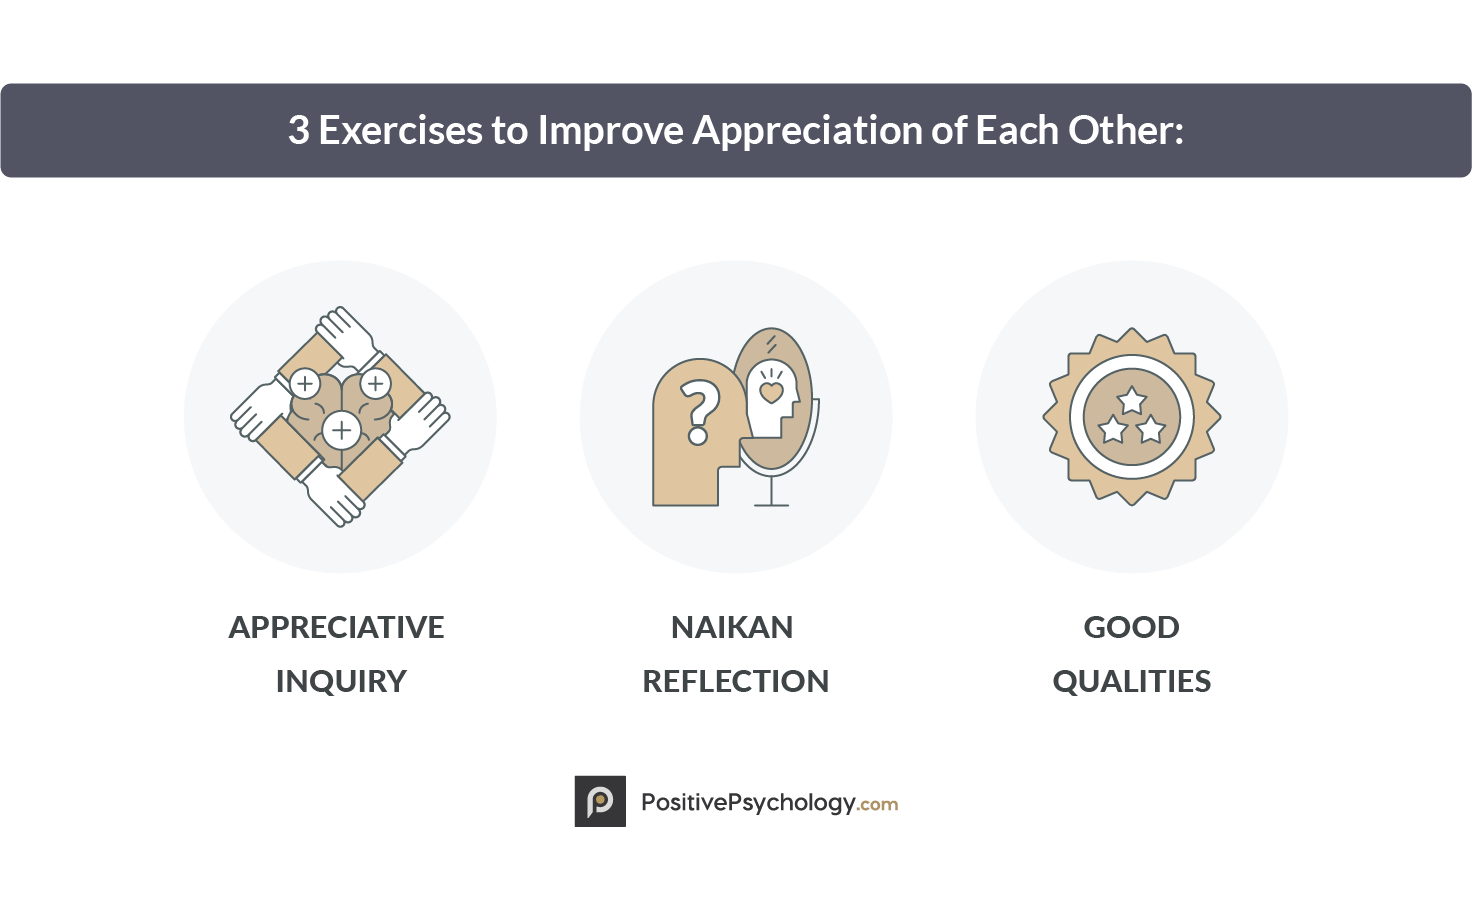 3 Exercises to Improve Appreciation of Each Other